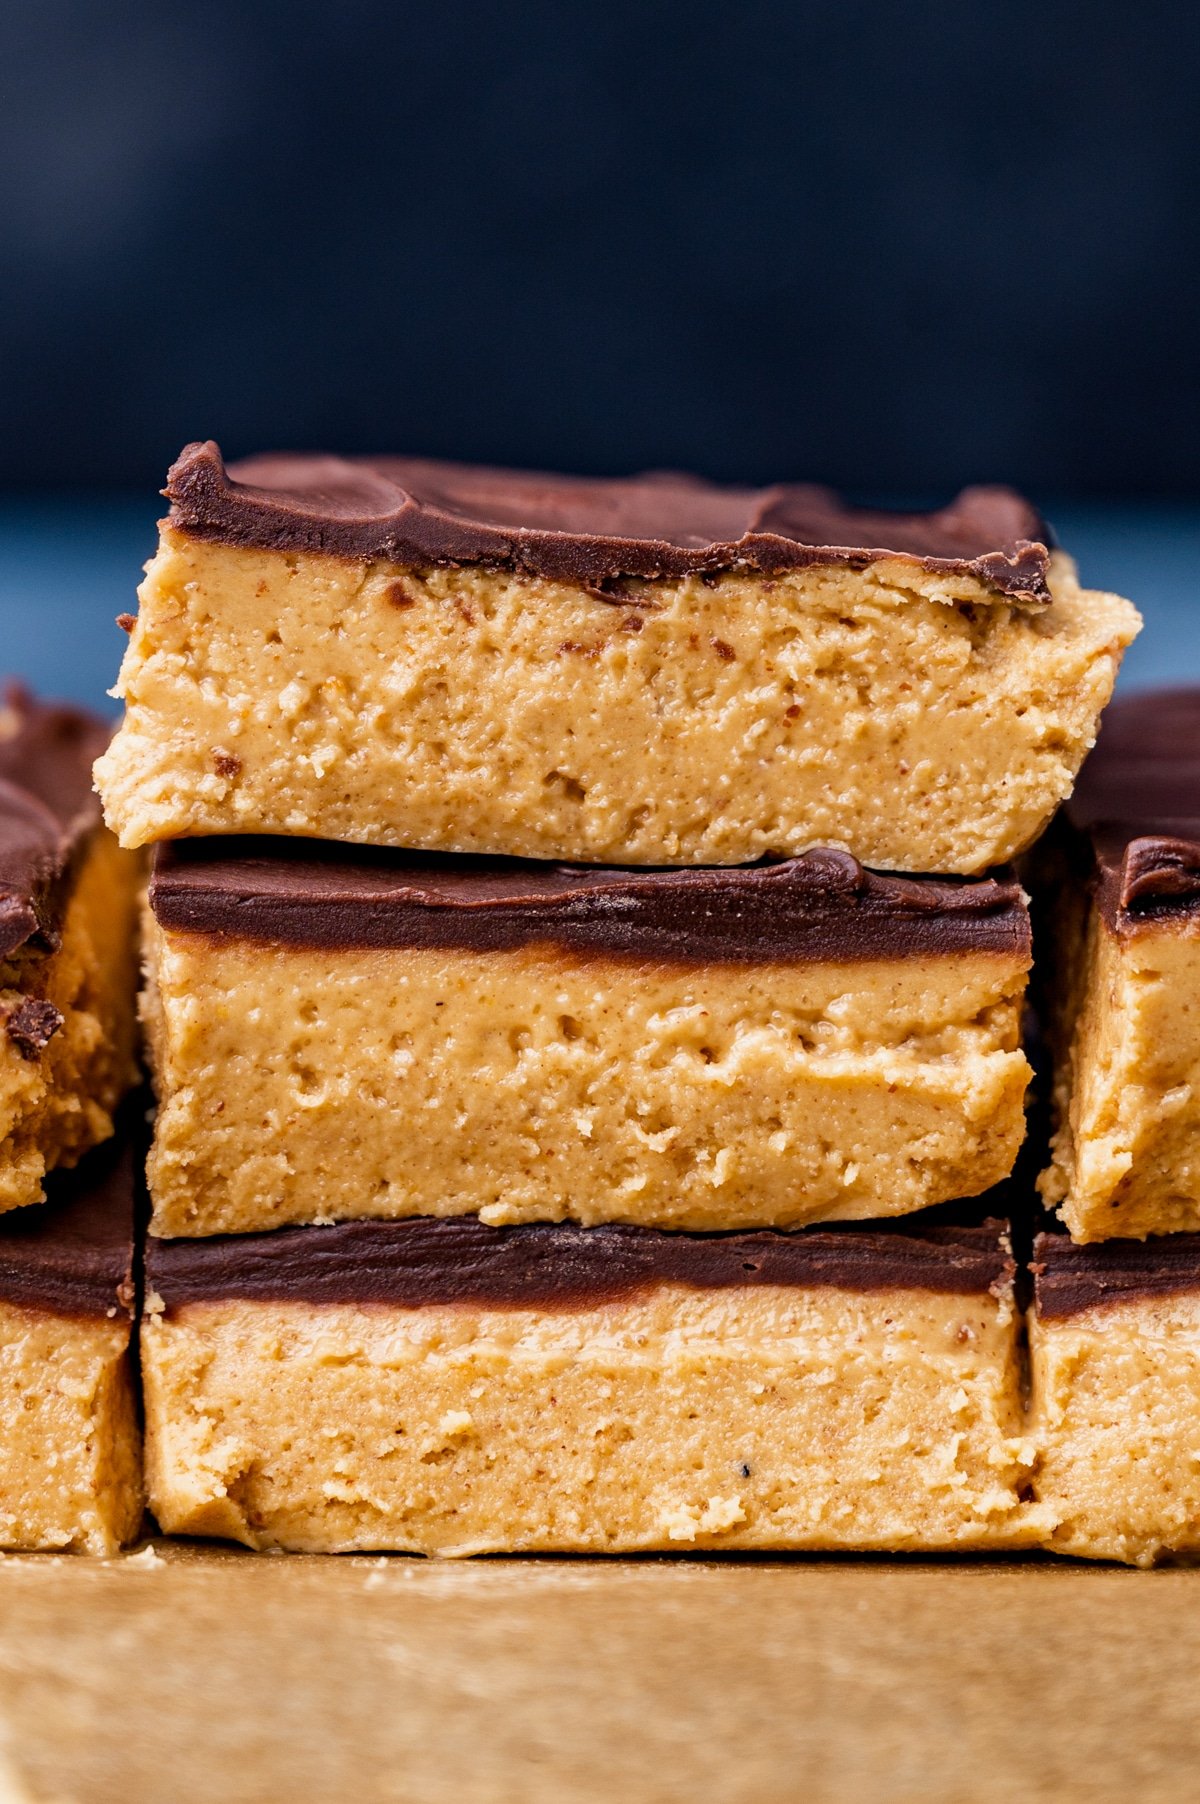 I Tried That Mess-Free Trick for Blending Oily Peanut Butter